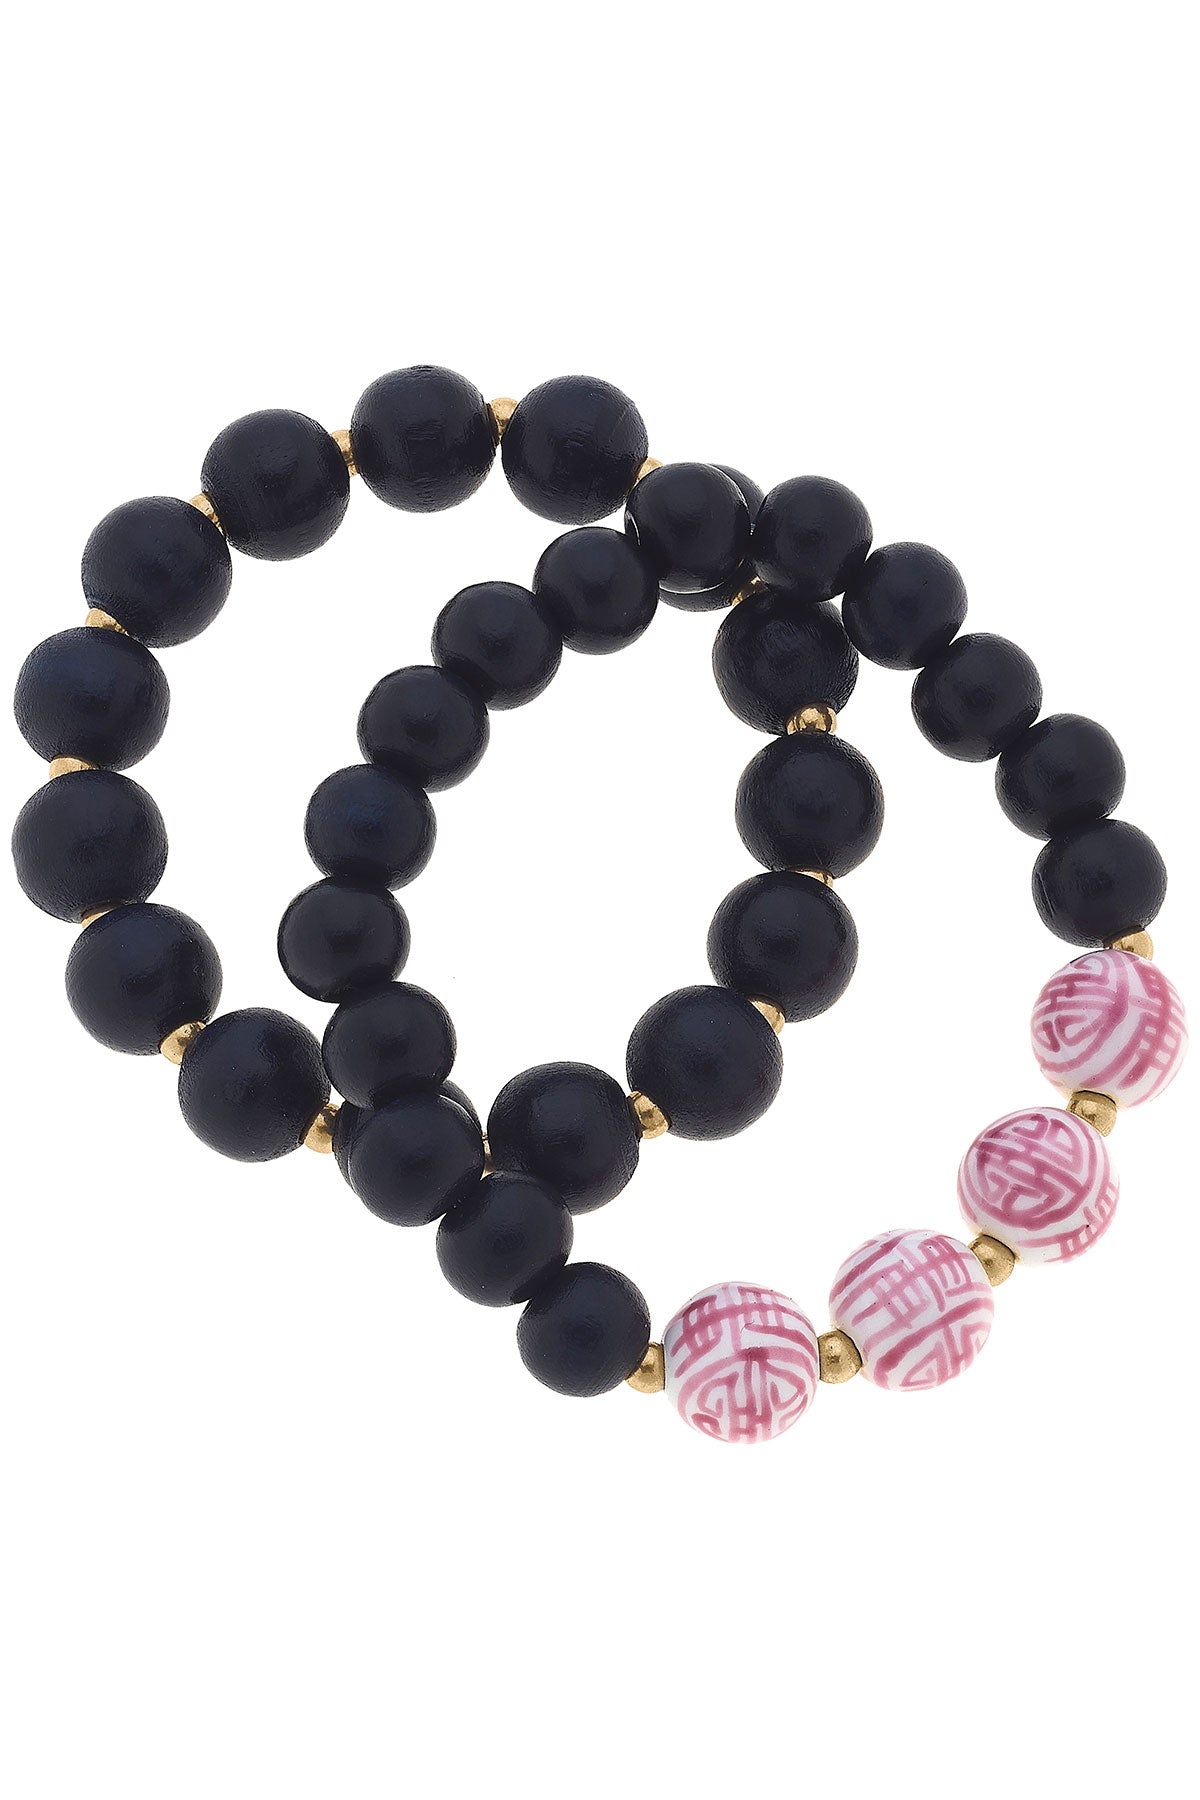 Iris Pink & White Chinoiserie & Painted Wood Stretch Bracelet Stack in Navy - Set of 2 by CANVAS